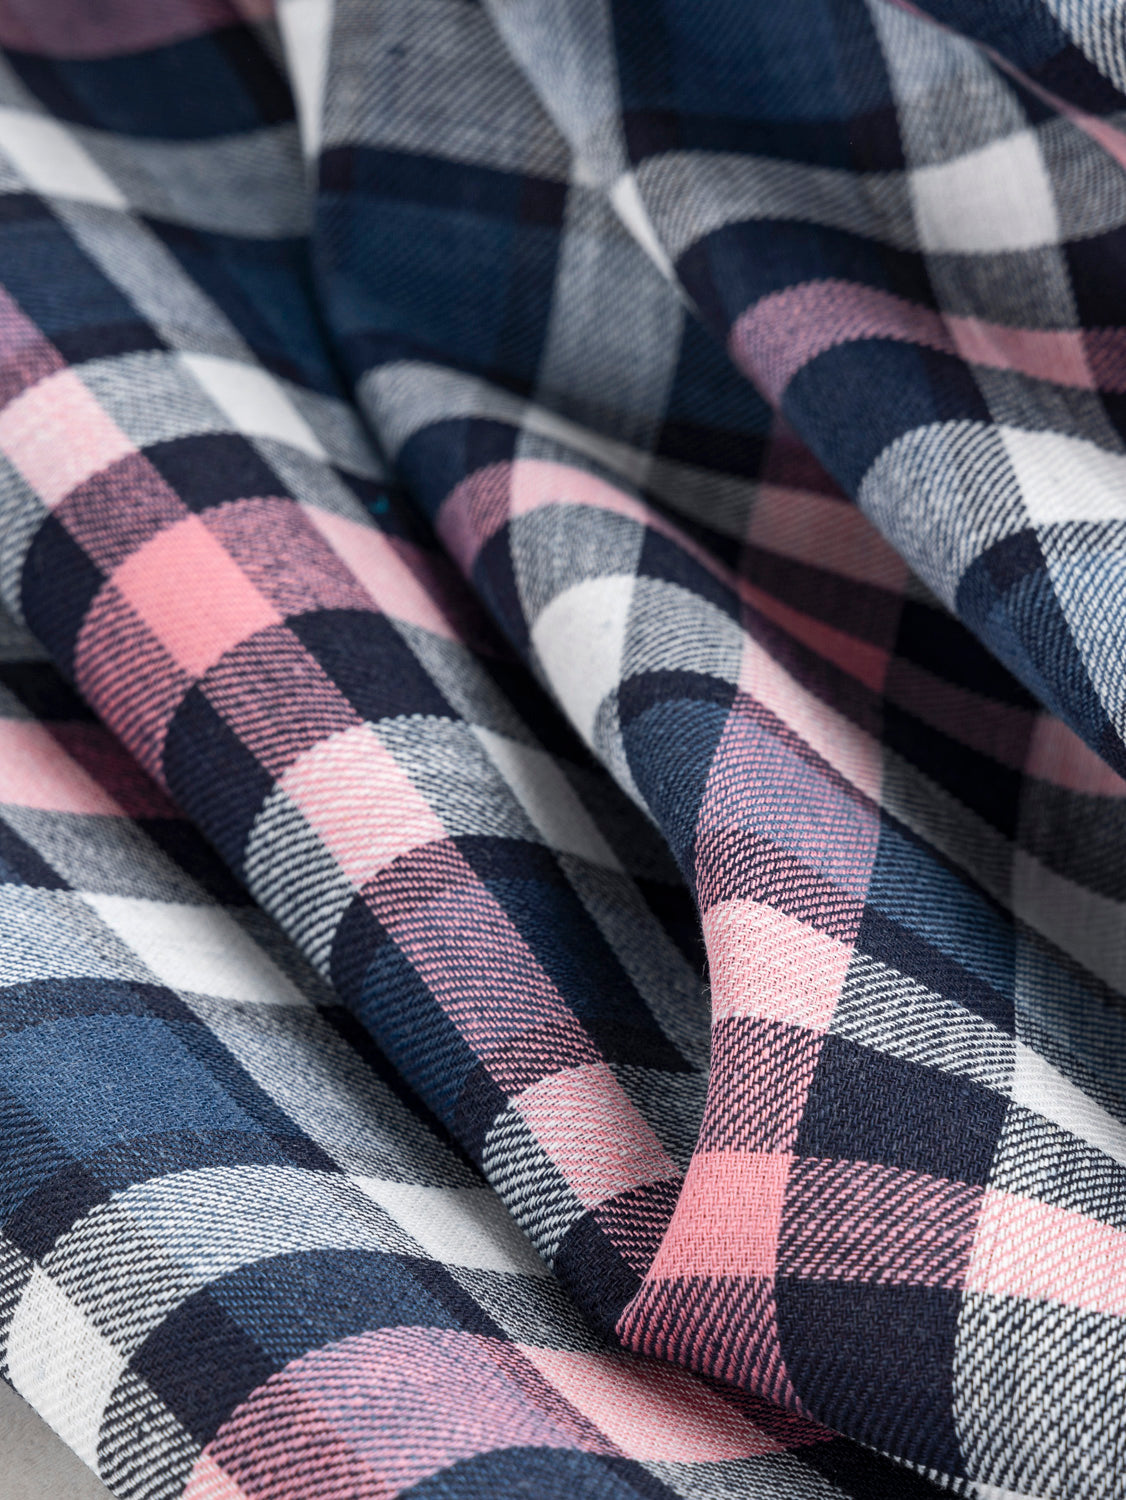 Yarn Dyed Plaid Linen Deadstock - Navy + Pink + White | Core Fabrics